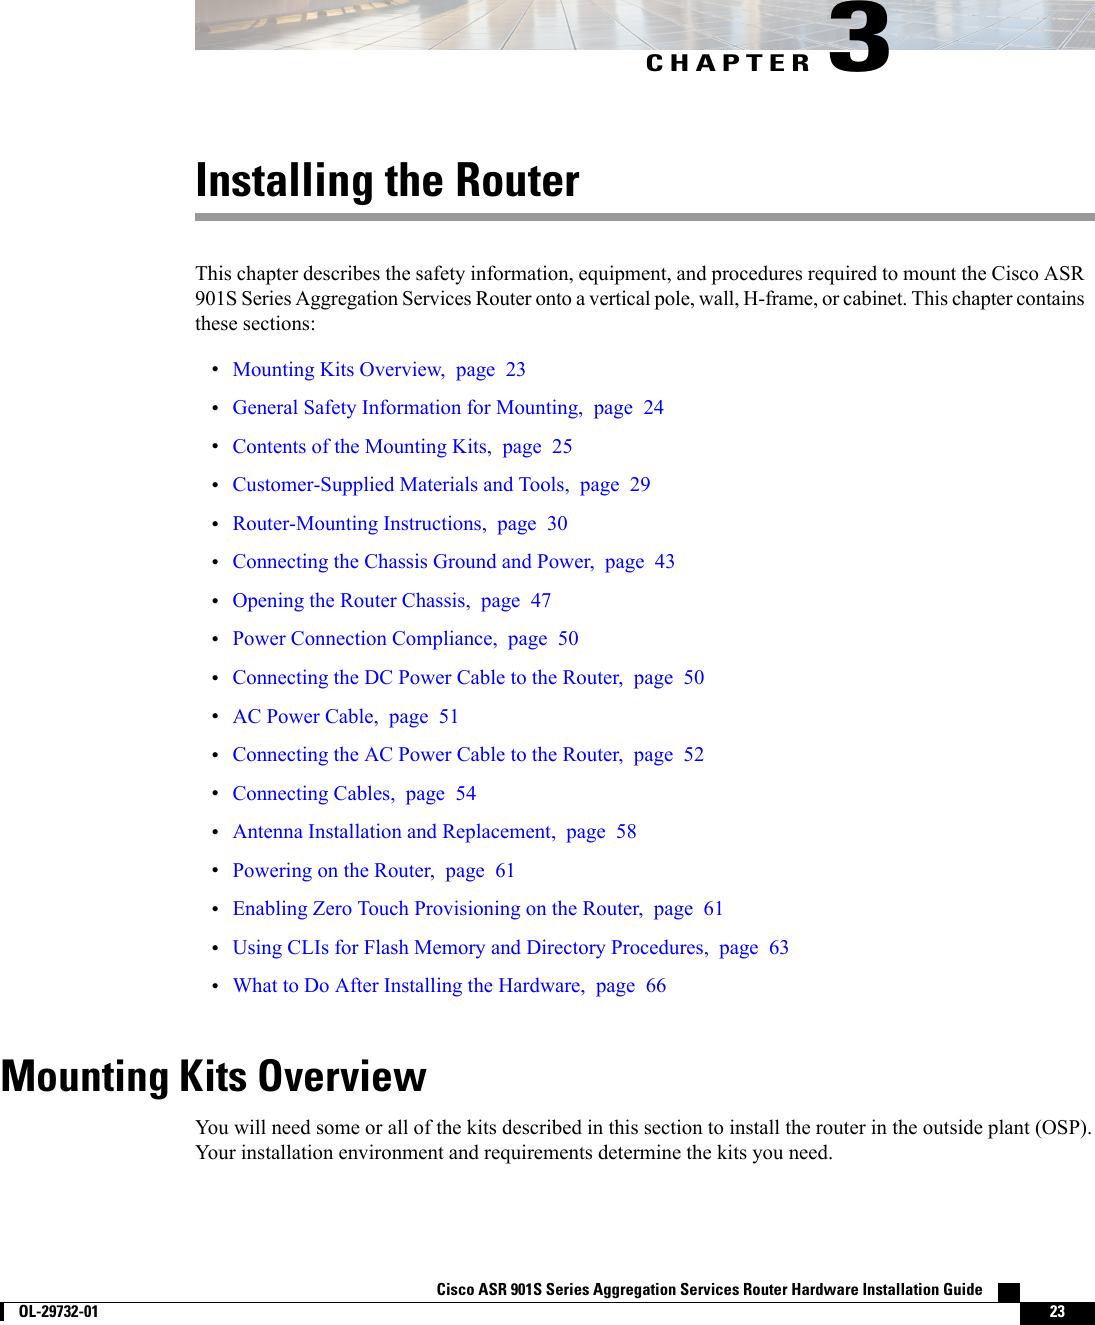 CHAPTER 3Installing the RouterThis chapter describes the safety information, equipment, and procedures required to mount the Cisco ASR901S Series Aggregation Services Router onto a vertical pole, wall, H-frame, or cabinet. This chapter containsthese sections:•Mounting Kits Overview, page 23•General Safety Information for Mounting, page 24•Contents of the Mounting Kits, page 25•Customer-Supplied Materials and Tools, page 29•Router-Mounting Instructions, page 30•Connecting the Chassis Ground and Power, page 43•Opening the Router Chassis, page 47•Power Connection Compliance, page 50•Connecting the DC Power Cable to the Router, page 50•AC Power Cable, page 51•Connecting the AC Power Cable to the Router, page 52•Connecting Cables, page 54•Antenna Installation and Replacement, page 58•Powering on the Router, page 61•Enabling Zero Touch Provisioning on the Router, page 61•Using CLIs for Flash Memory and Directory Procedures, page 63•What to Do After Installing the Hardware, page 66Mounting Kits OverviewYou will need some or all of the kits described in this section to install the router in the outside plant (OSP).Your installation environment and requirements determine the kits you need.Cisco ASR 901S Series Aggregation Services Router Hardware Installation Guide        OL-29732-01 23